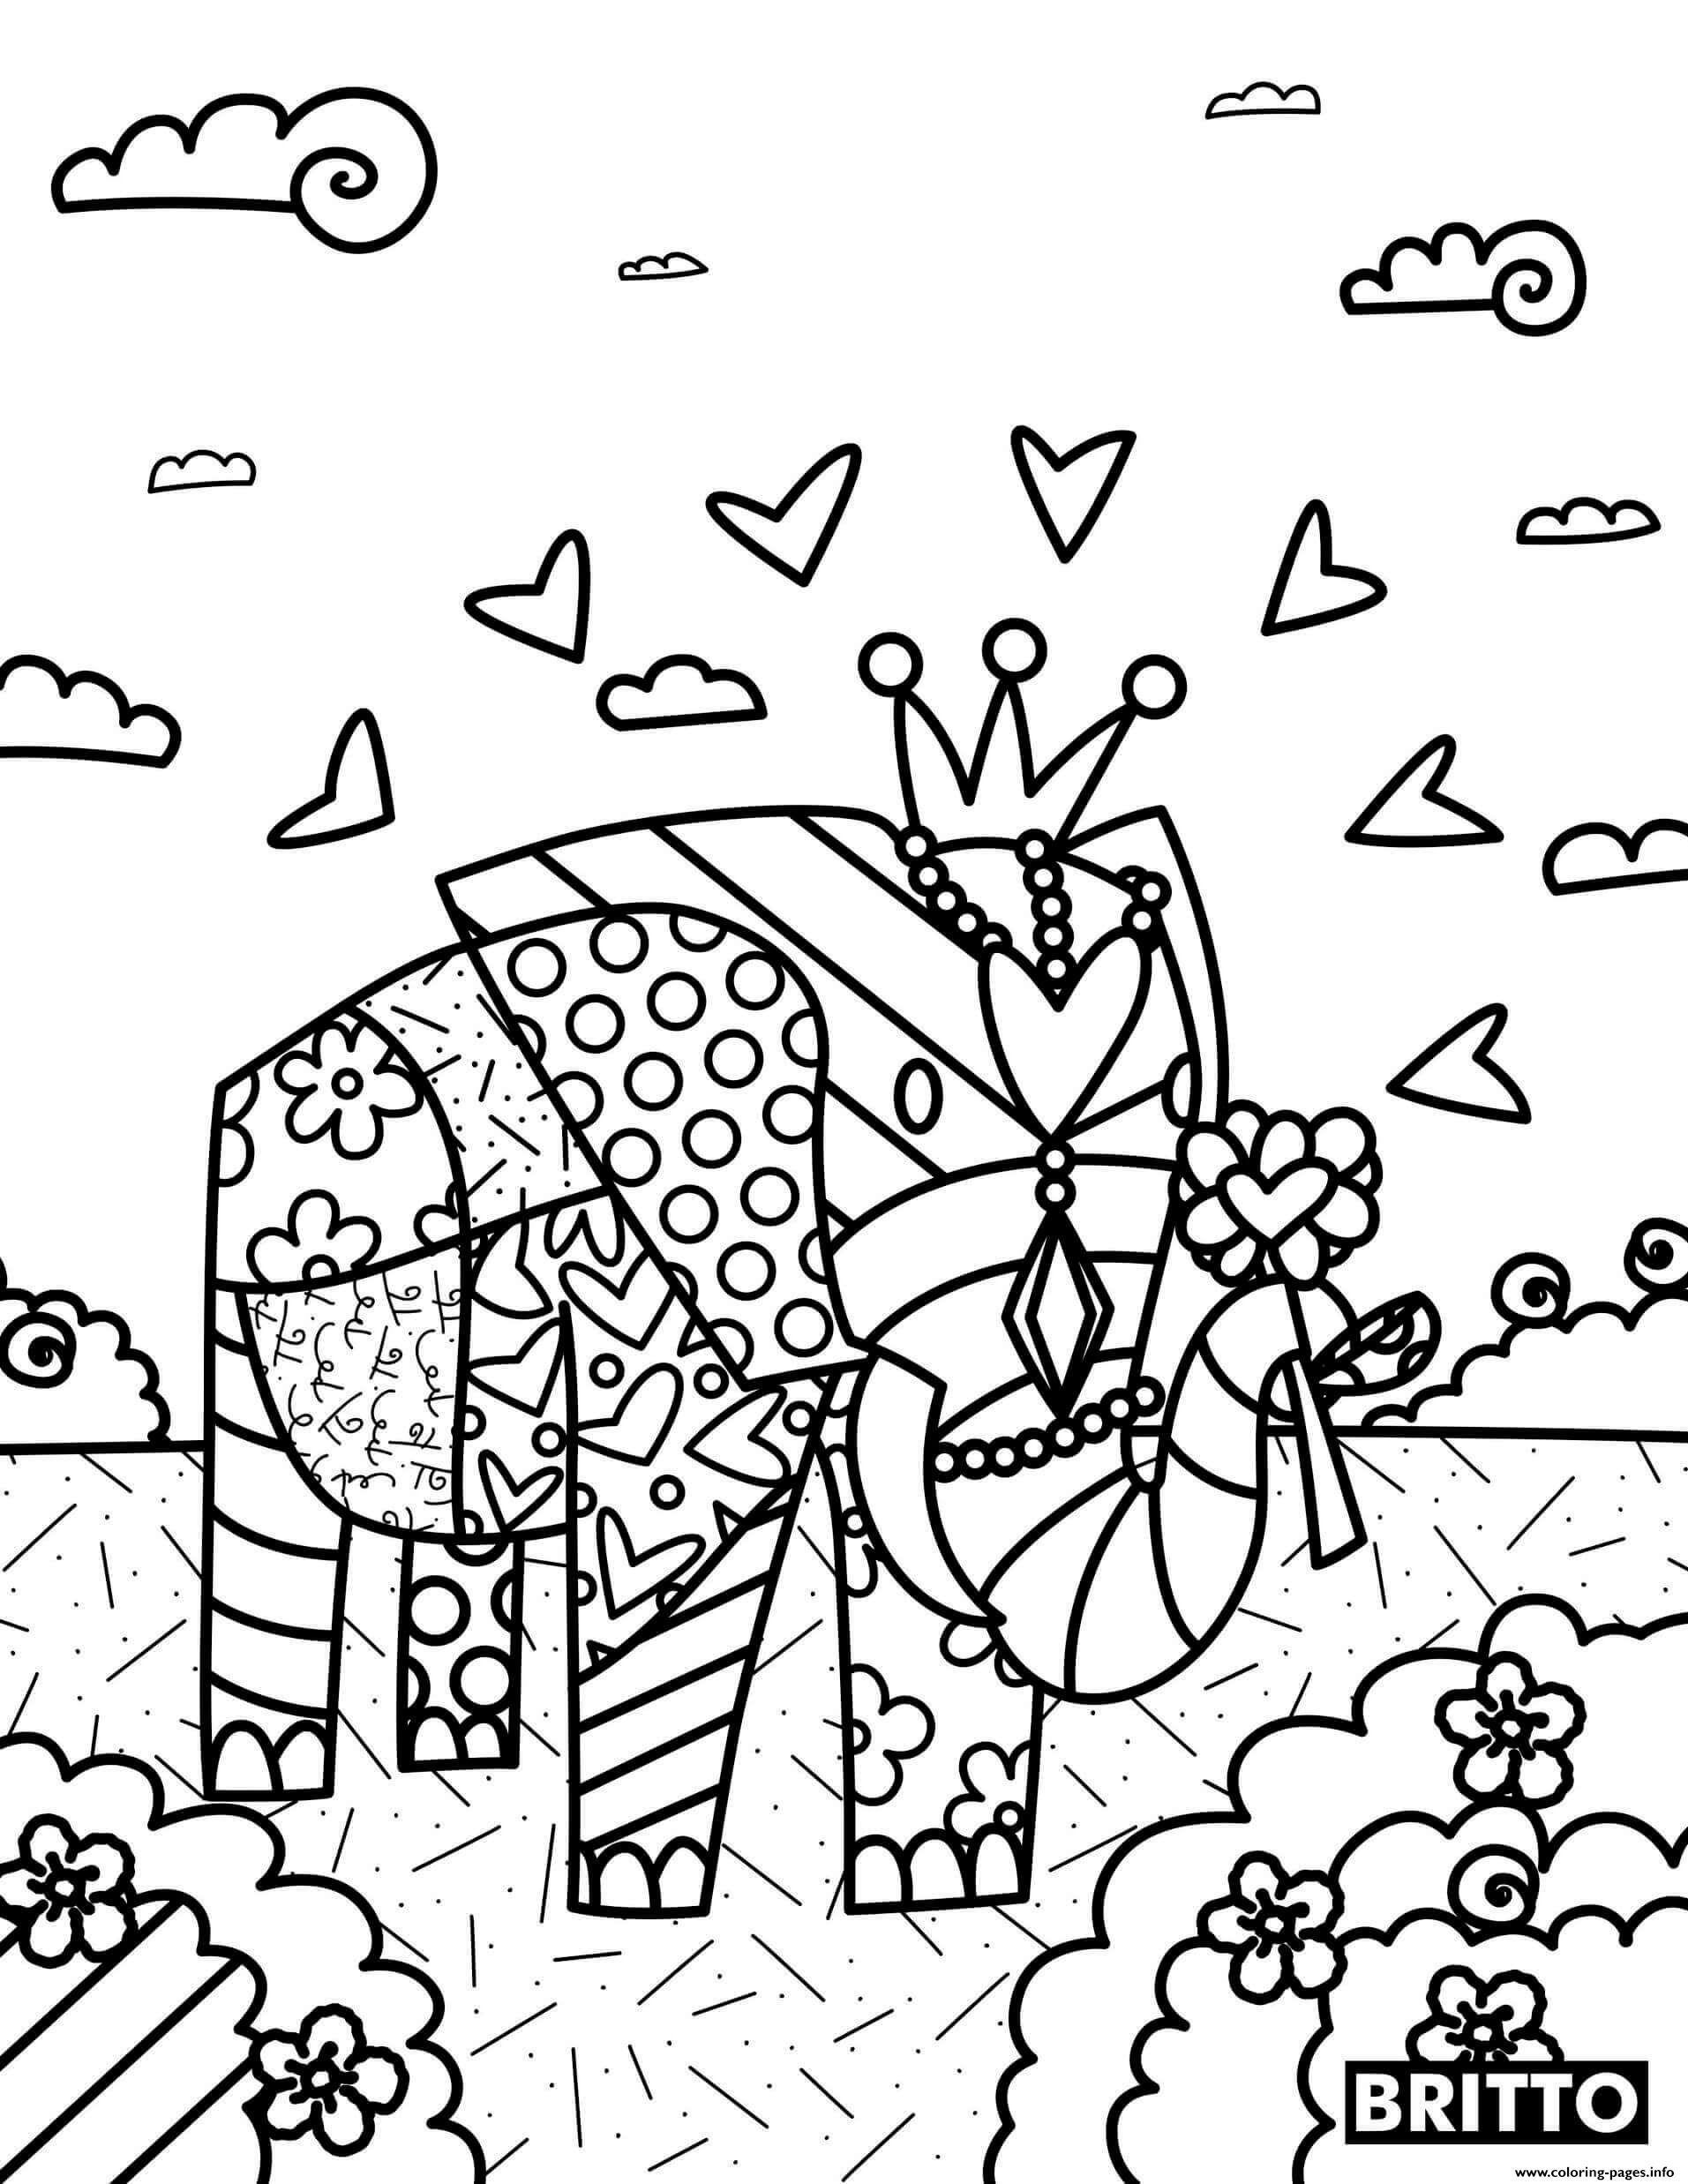 Elephant Animals By Romero Britto coloring